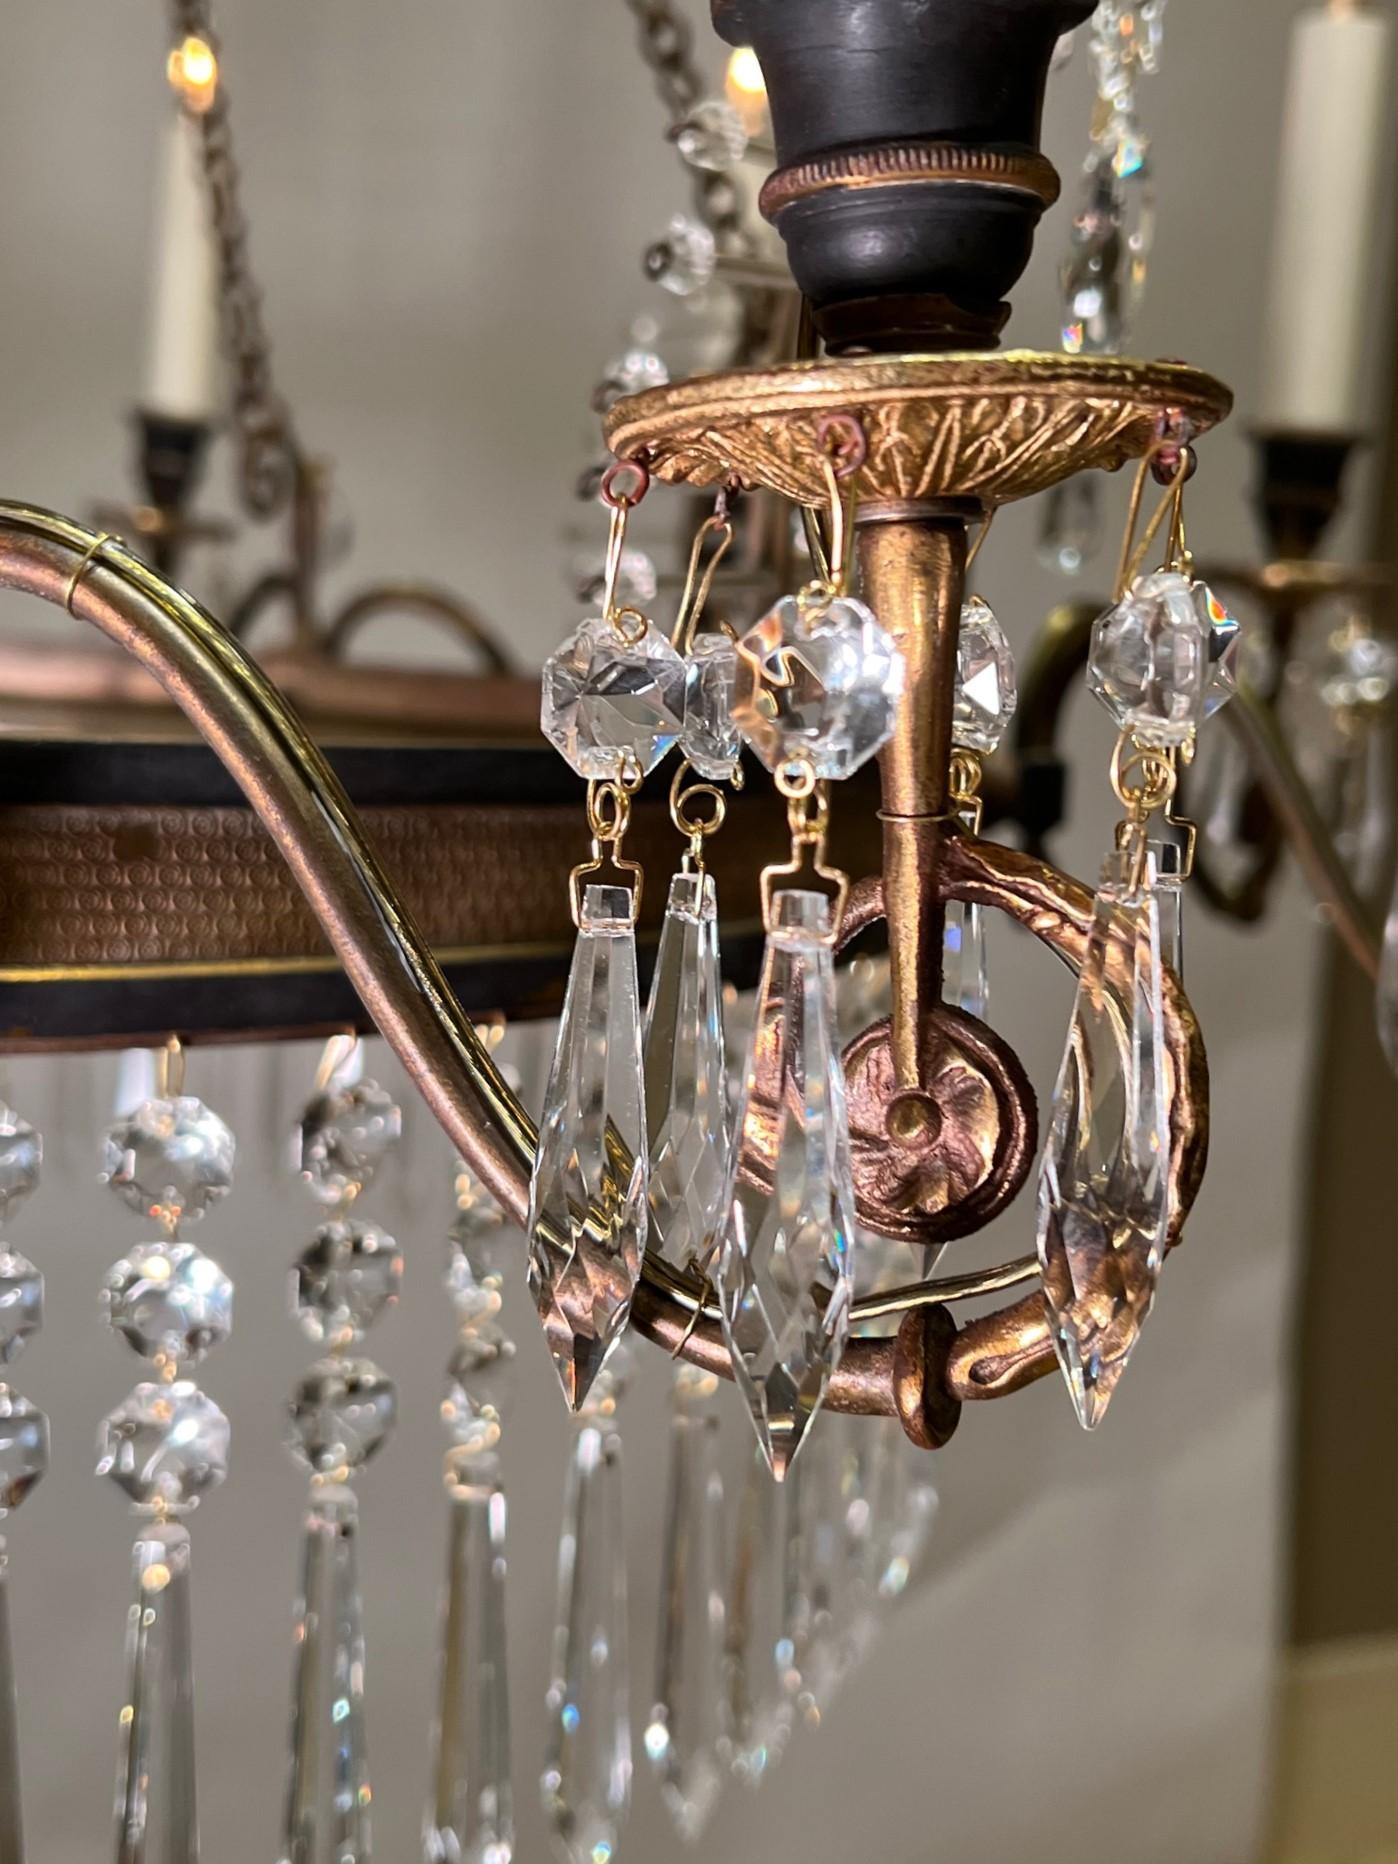 Neo-Classic Style 10-Light Bronze & Crystal Chandelier, Italy, Circa:1920 For Sale 4